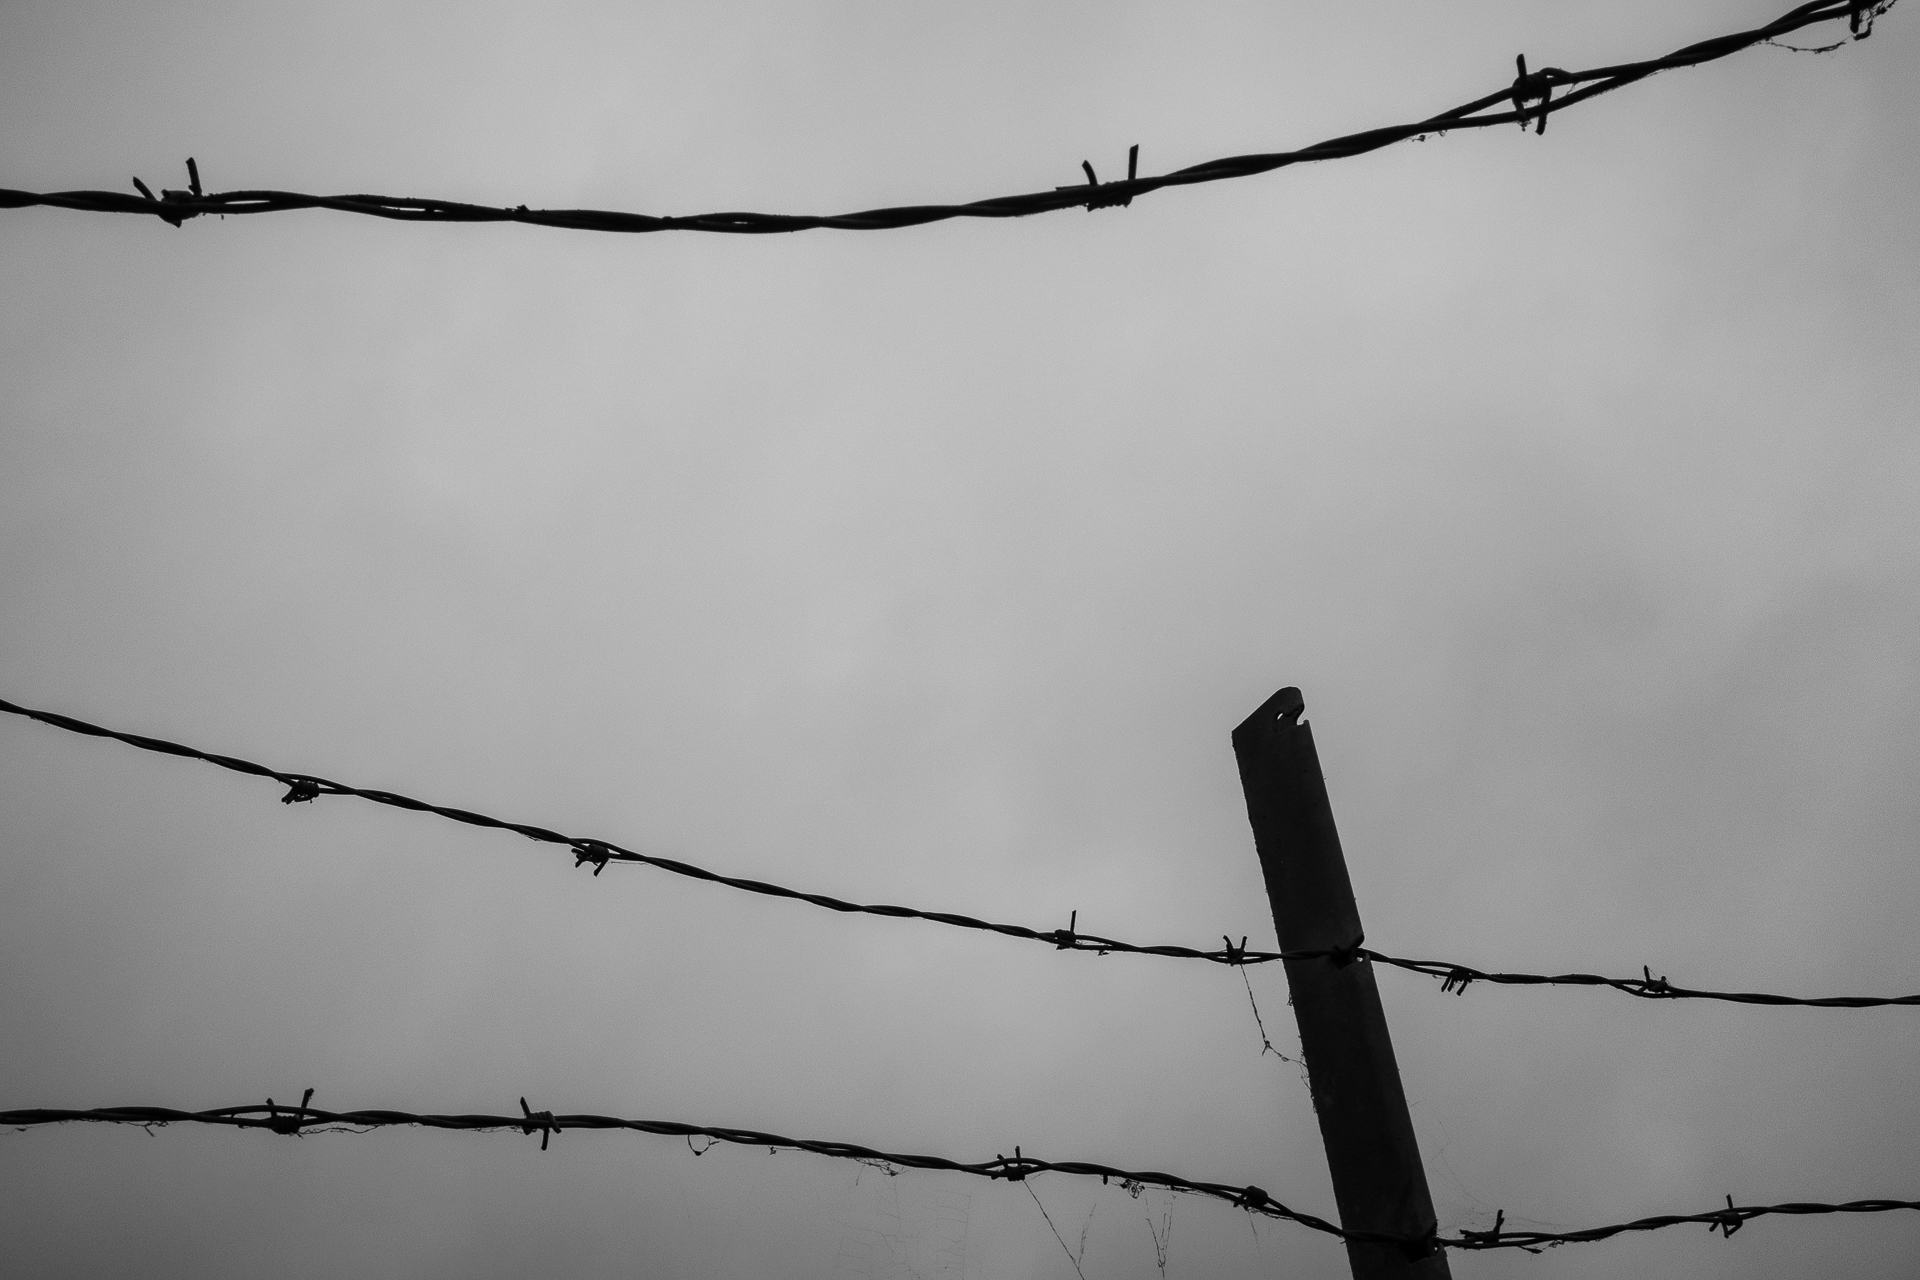 Barbed wire against cloudy sky